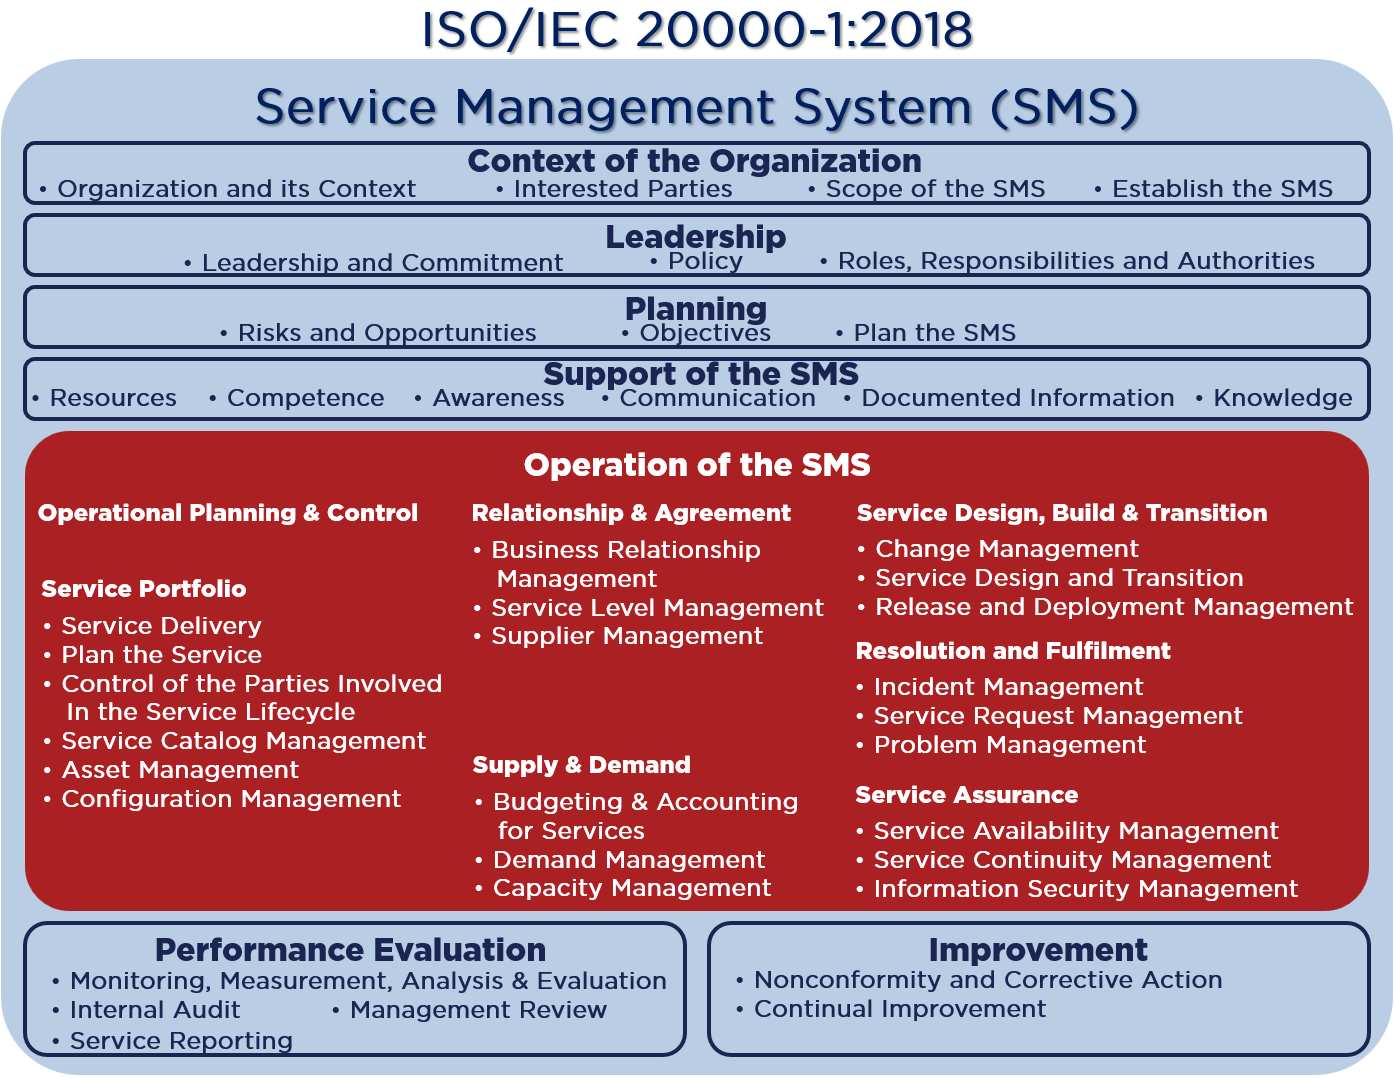 ISO/IEC 20000 SMS